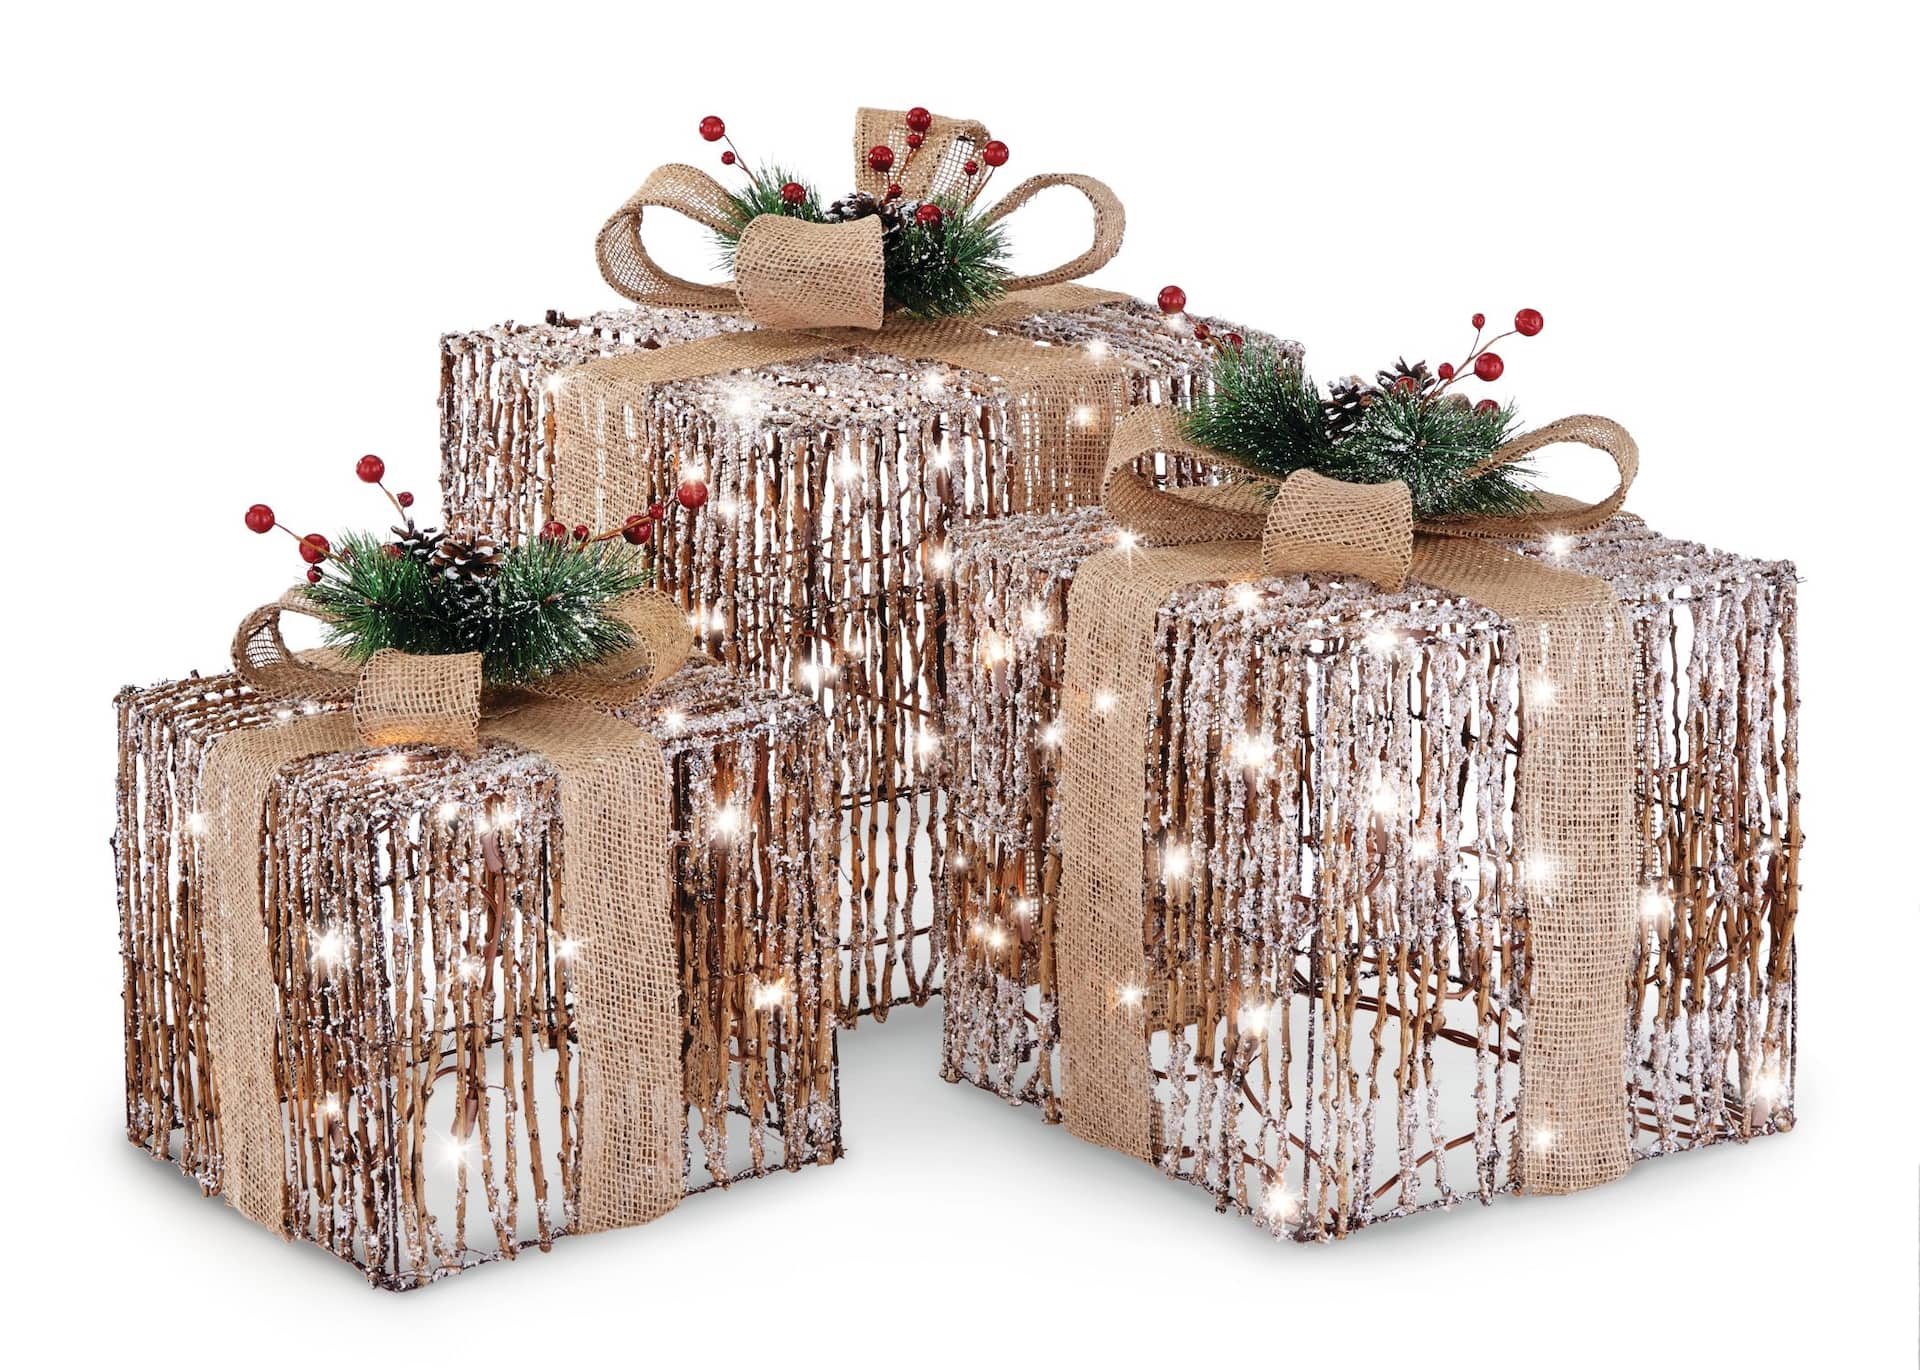 Gifts Tomorrow  Large Range of Home & Garden Gifts / Presents